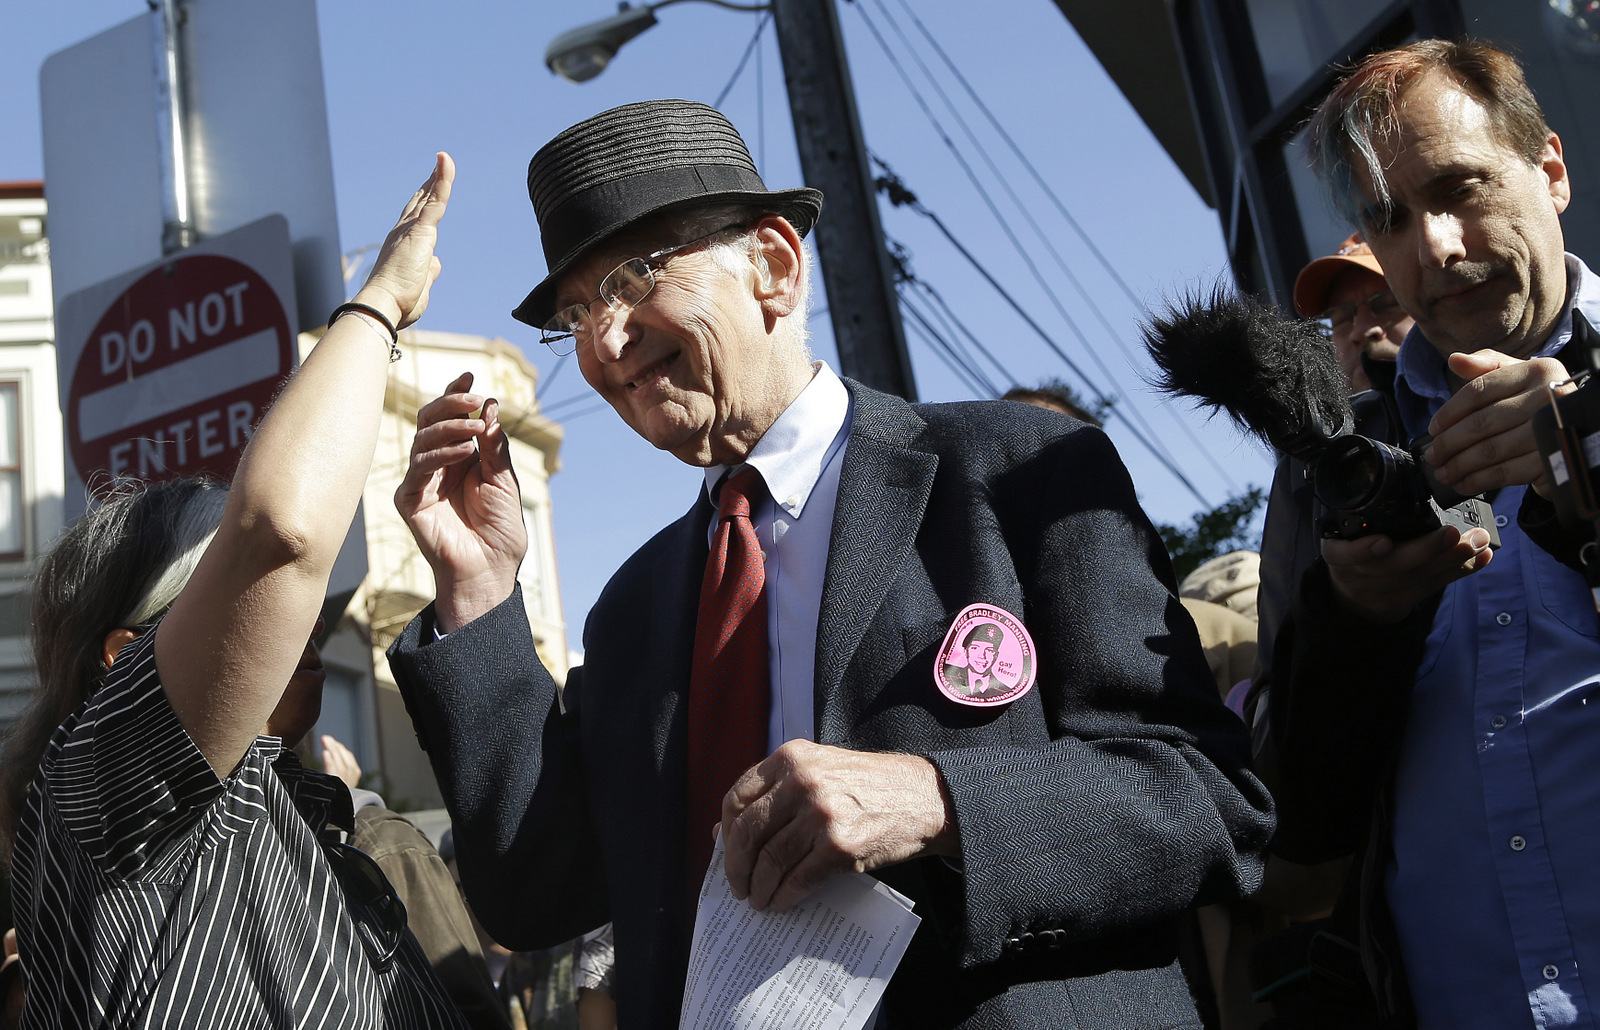 Daniel Ellsberg, center, is seen at a rally supporting Chelsea Manning in San Francisco, Tuesday, April 30, 2013. (AP Photo/Jeff Chiu)